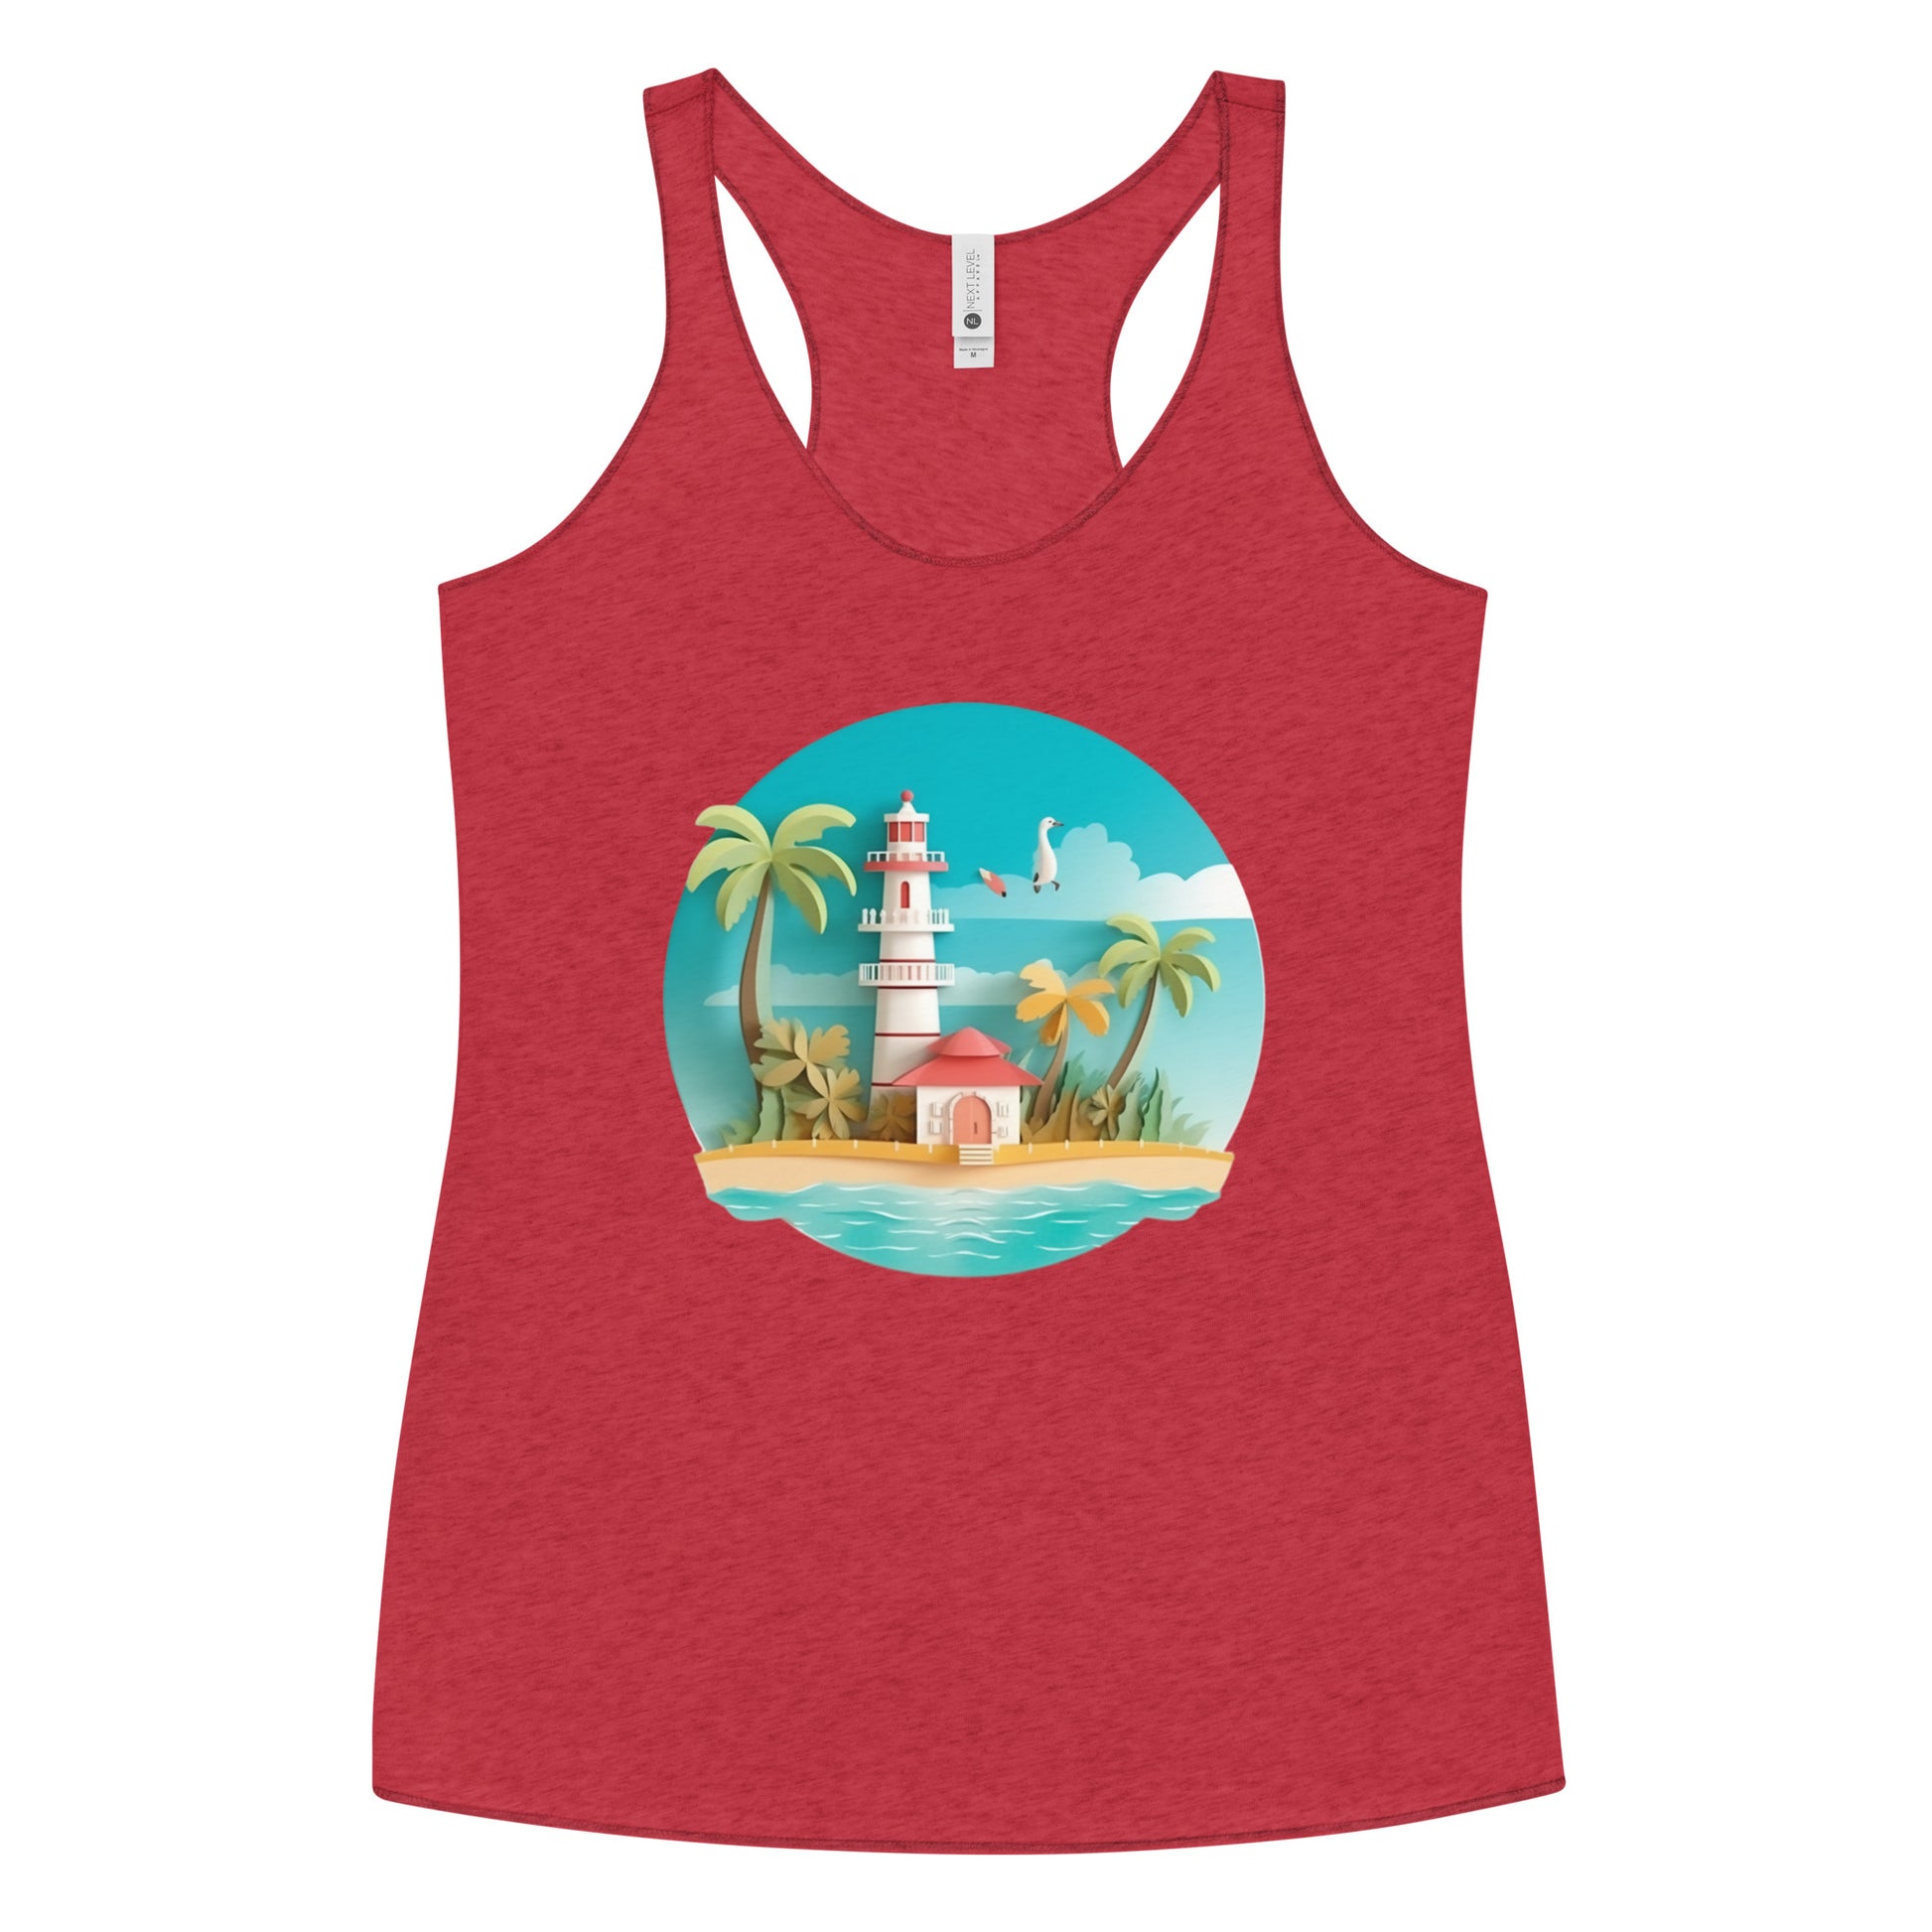 Red tank top with picture of lighthouse and palm trees